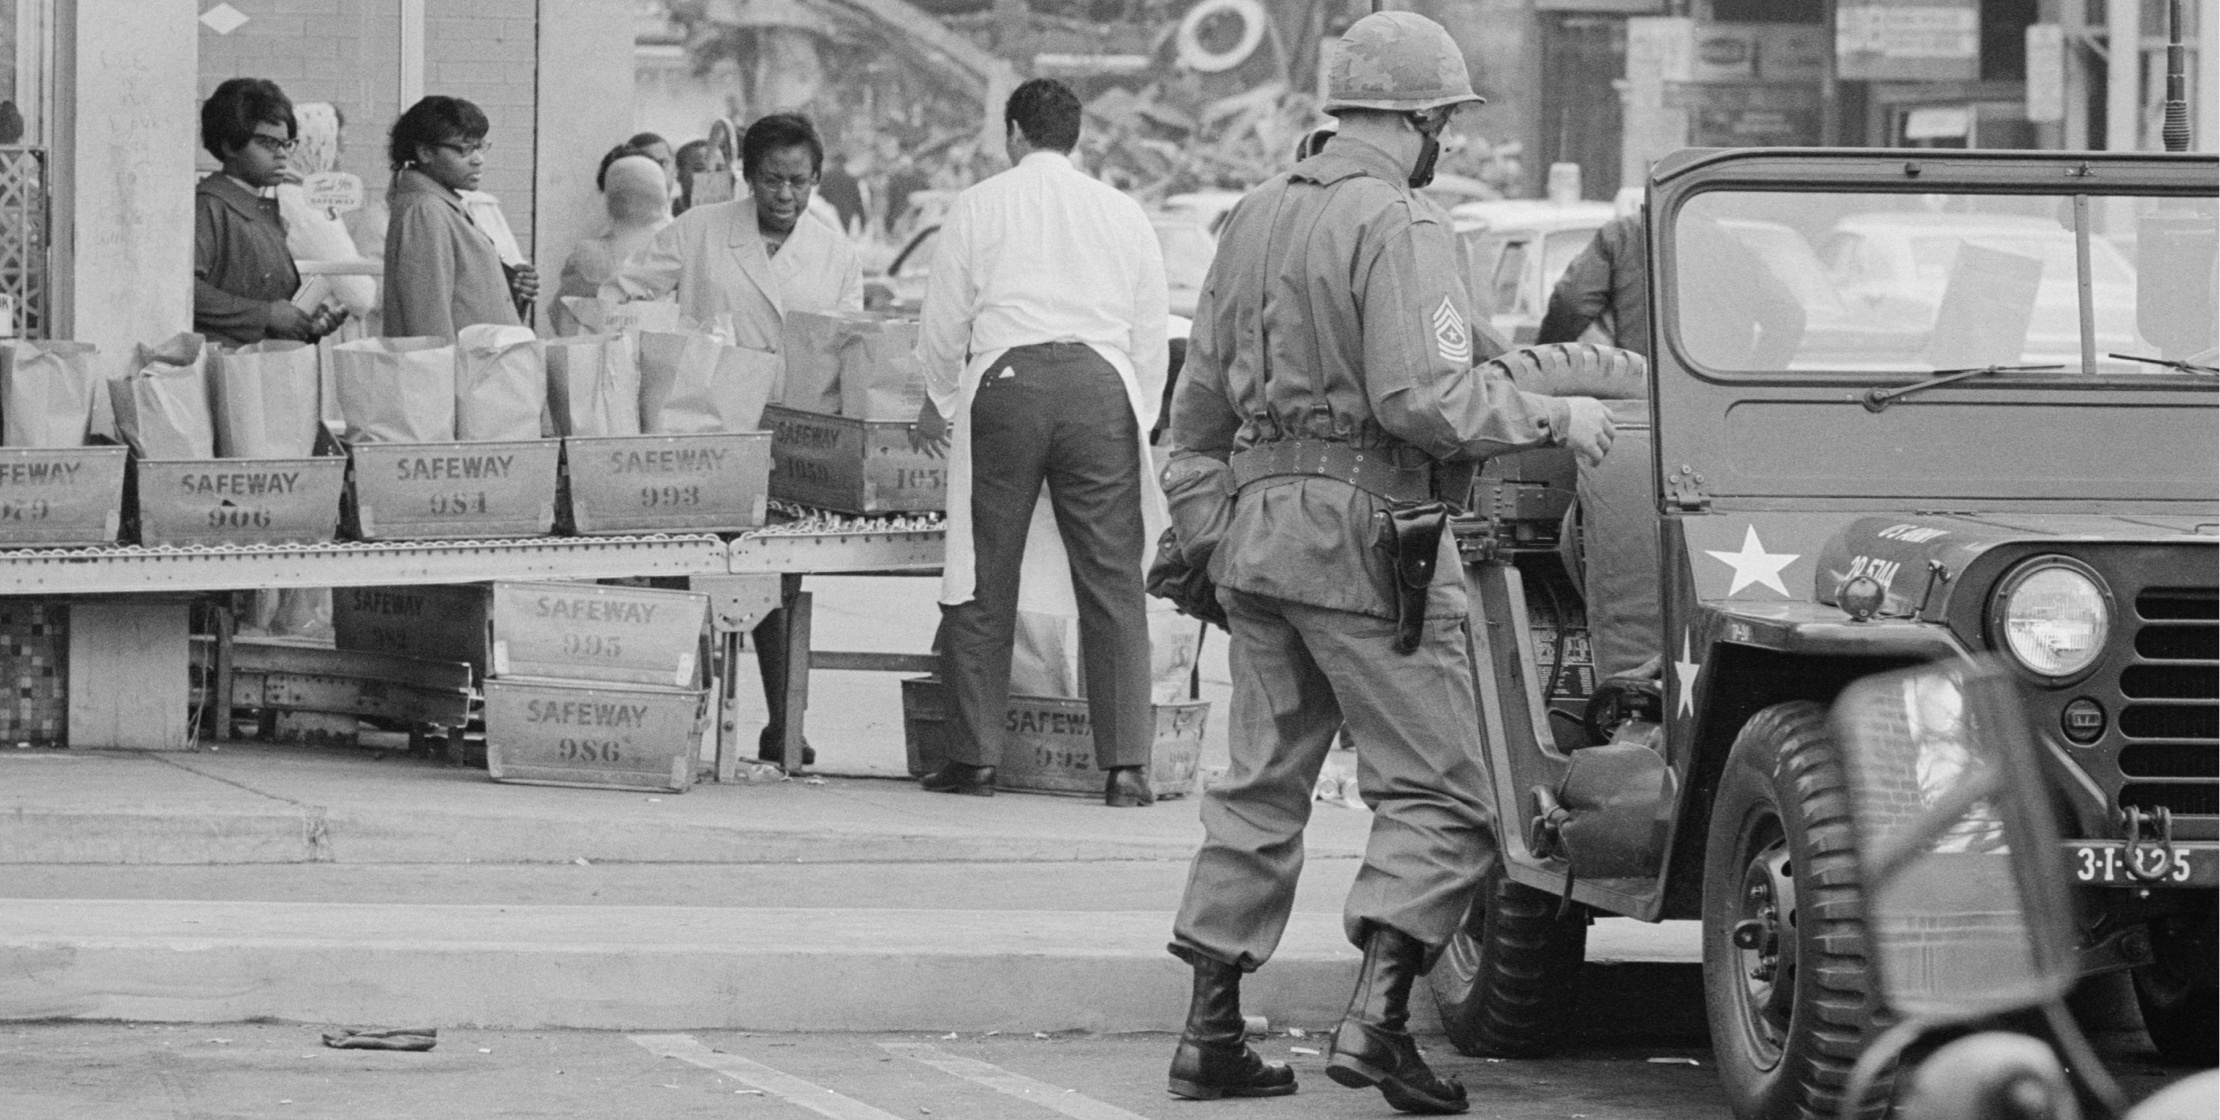 Black-and-white photograph of a street scene with soldiers